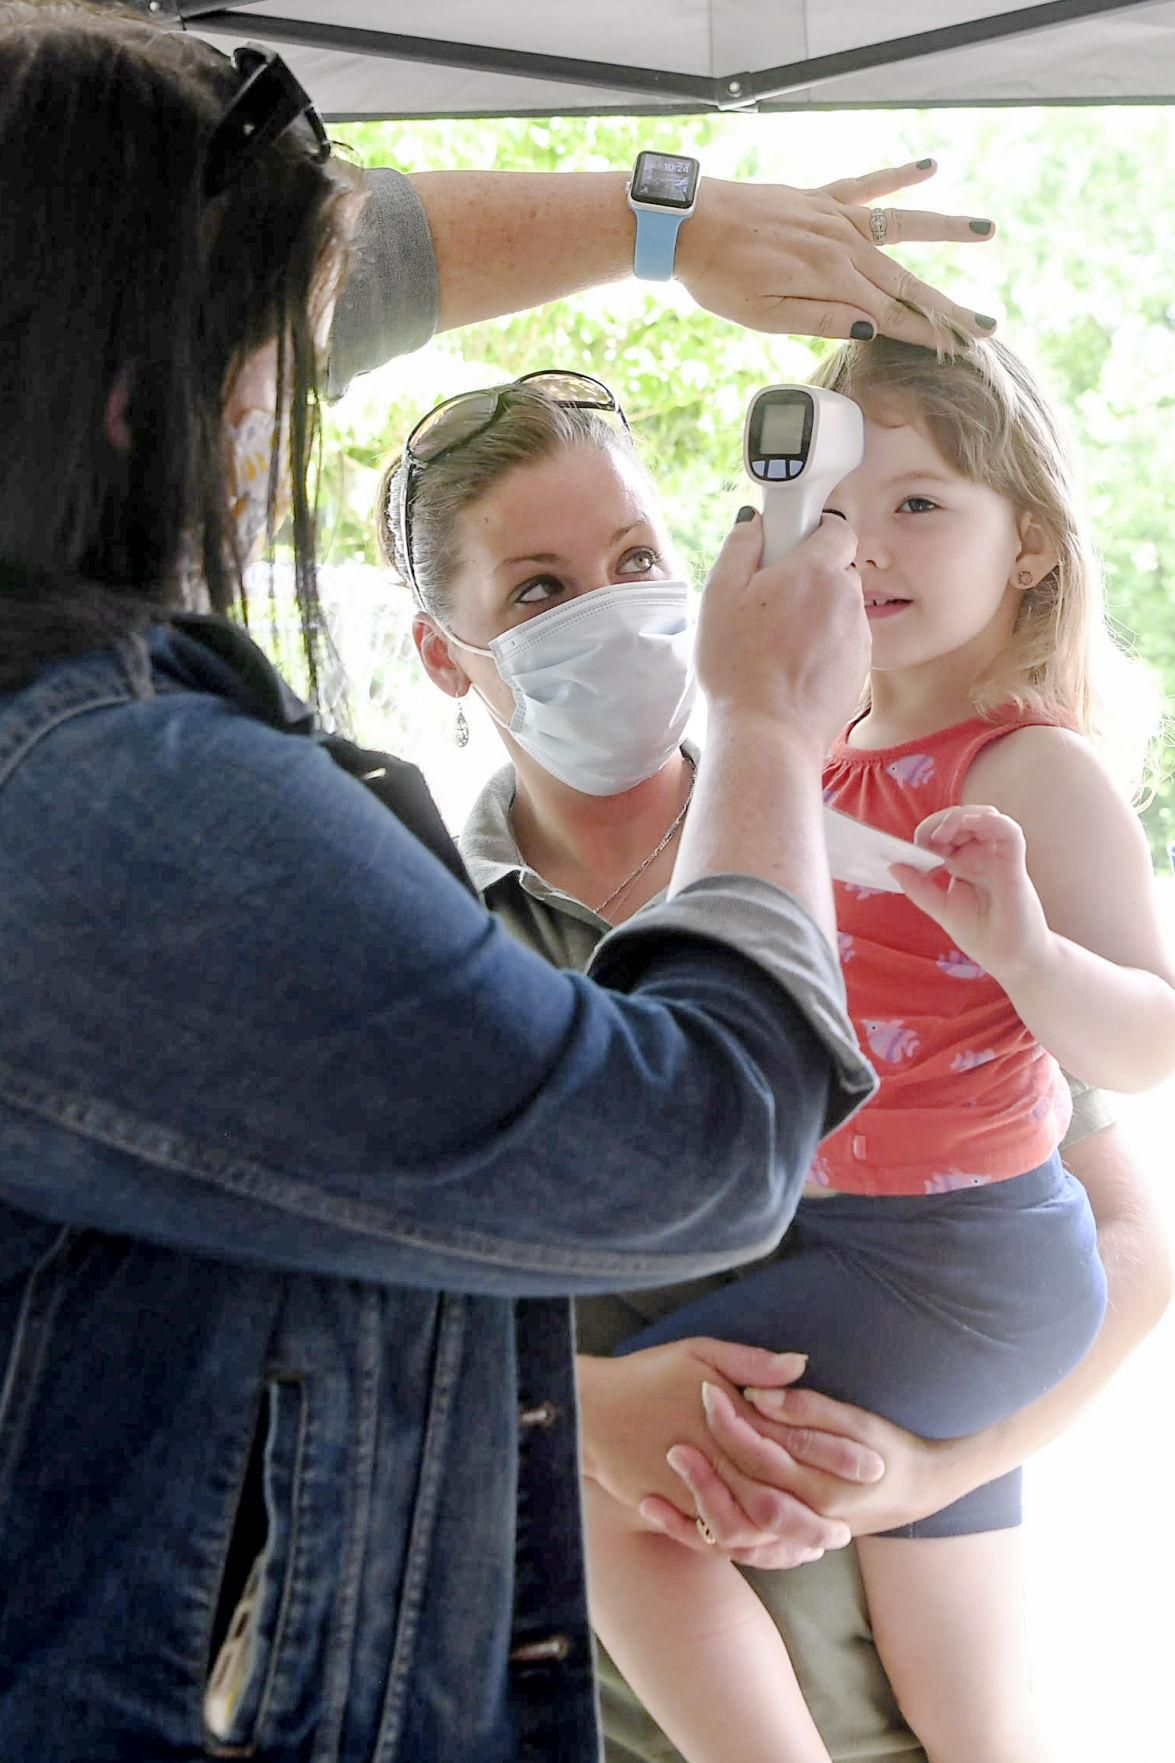 Amy Waddell holds her daughter, Aliza, 3, as her temperature is checked before spending the day at Montmorenci United Methodist Church’s day care in Candler on June 23. Image by Angela Wilhelm/Asheville Citizen Times/North Carolina News Collaborative. United States, 2020.

